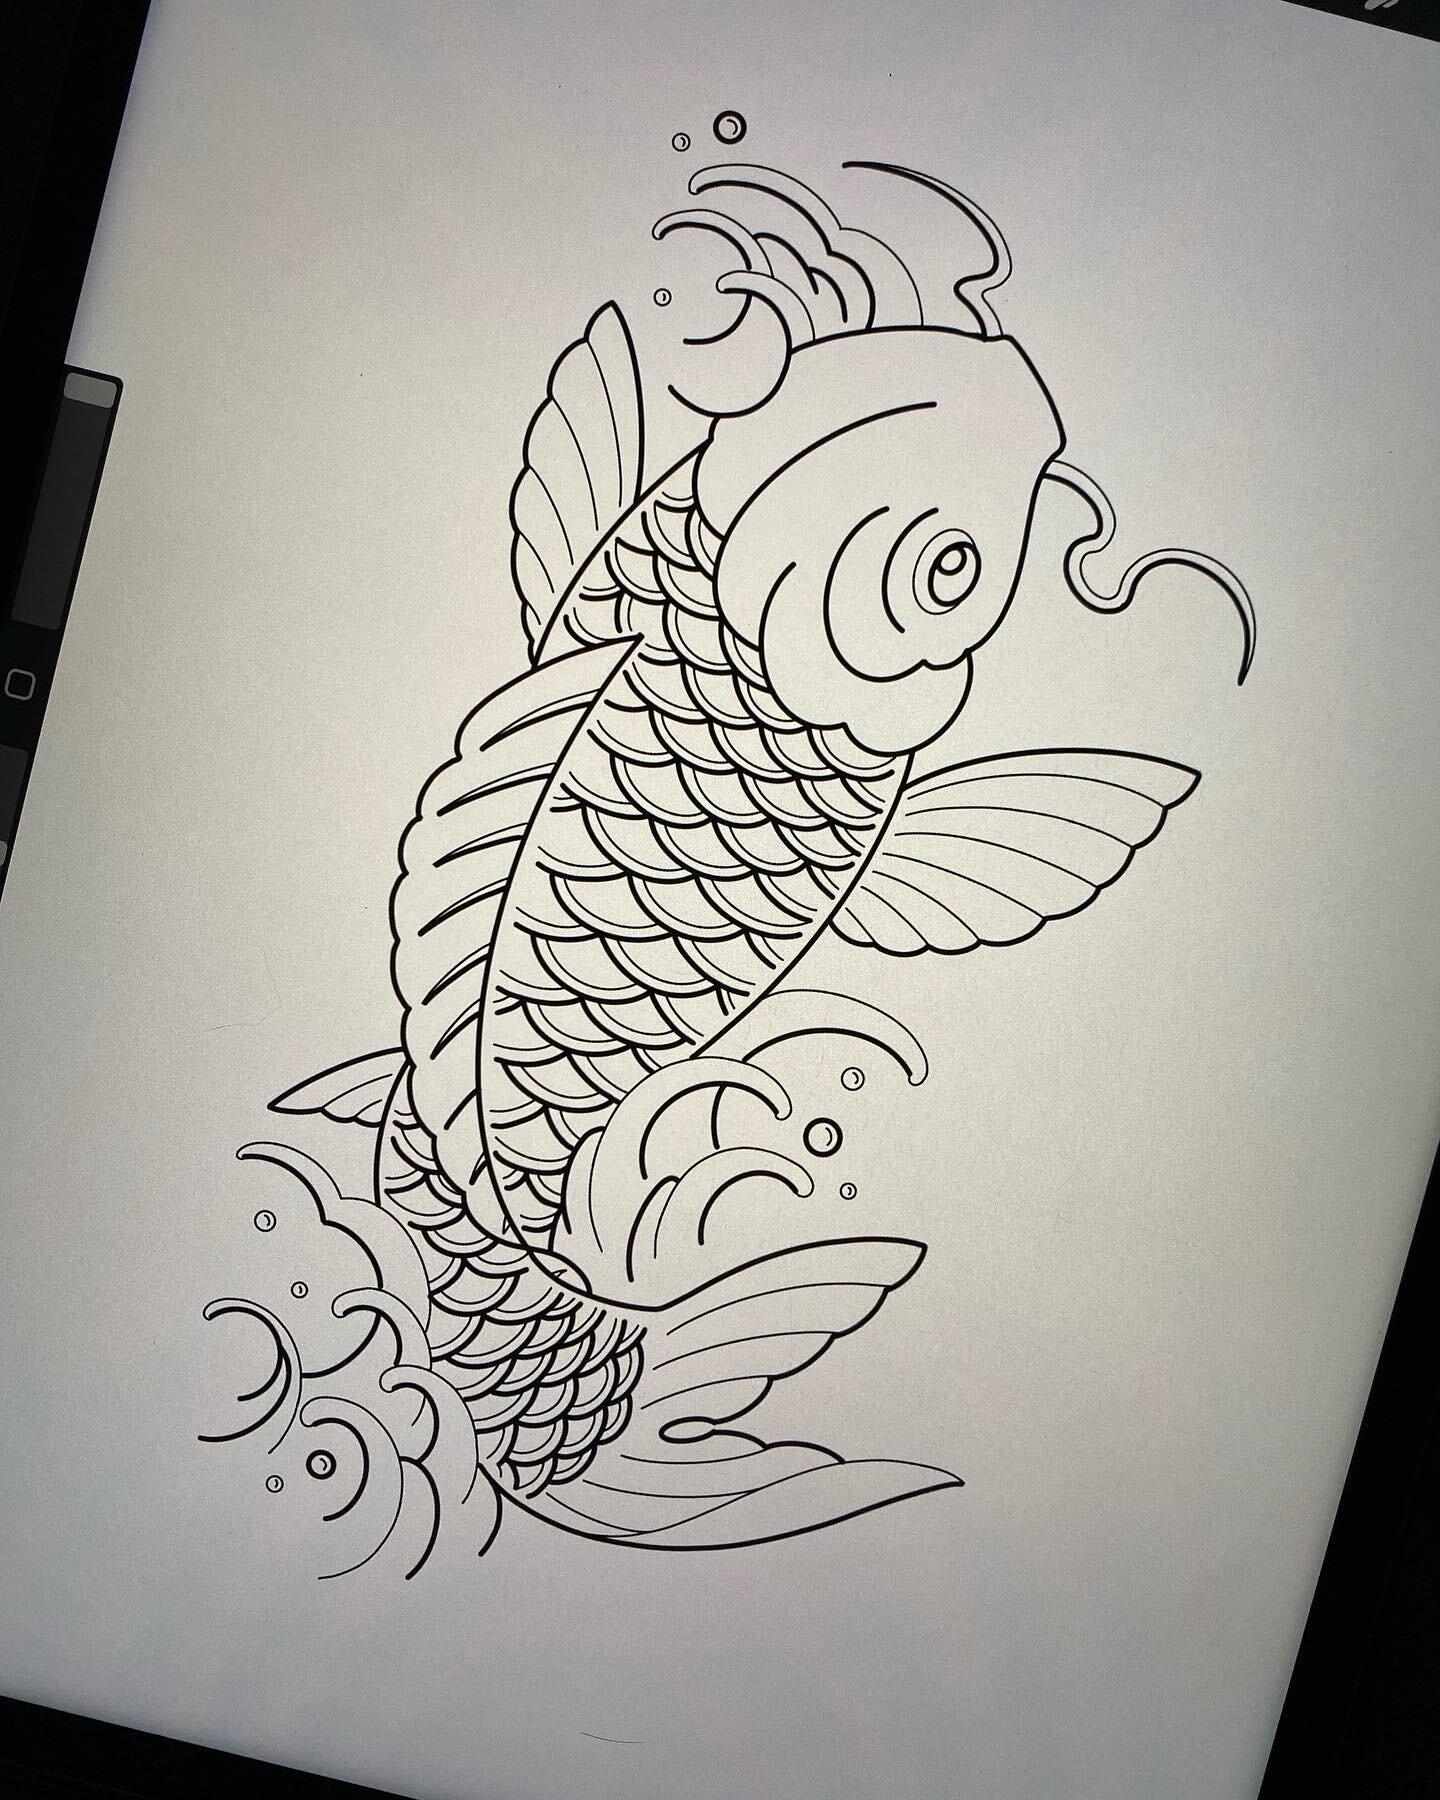 Because I&rsquo;m R E A L L Y trying to do more Koi fish, I&rsquo;ll be doing this one for REDUCED price. Design is about 8&rdquo; x 4&rdquo; (arms and legs only) and can be done in black/grey or color. DM me or call the shop if interested ✌️